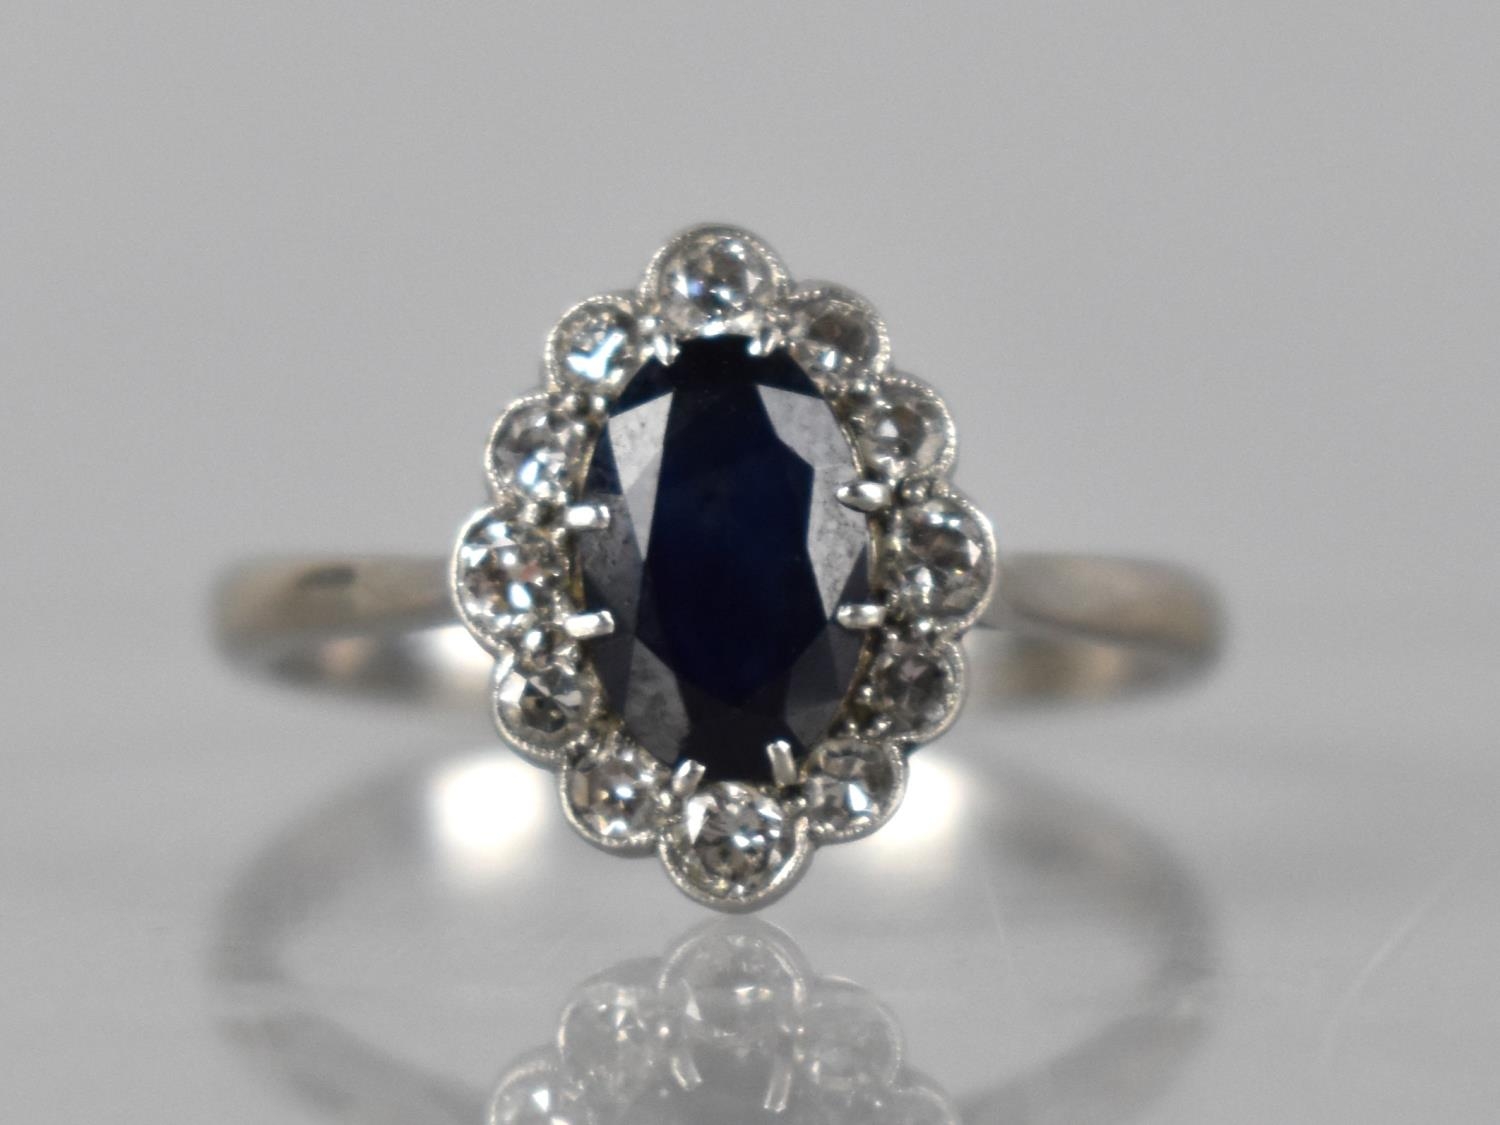 A Sapphire, Diamond and 18ct White Gold Ring, Large Oval Cut Sapphire Measuring 8mm by 5.5mm in